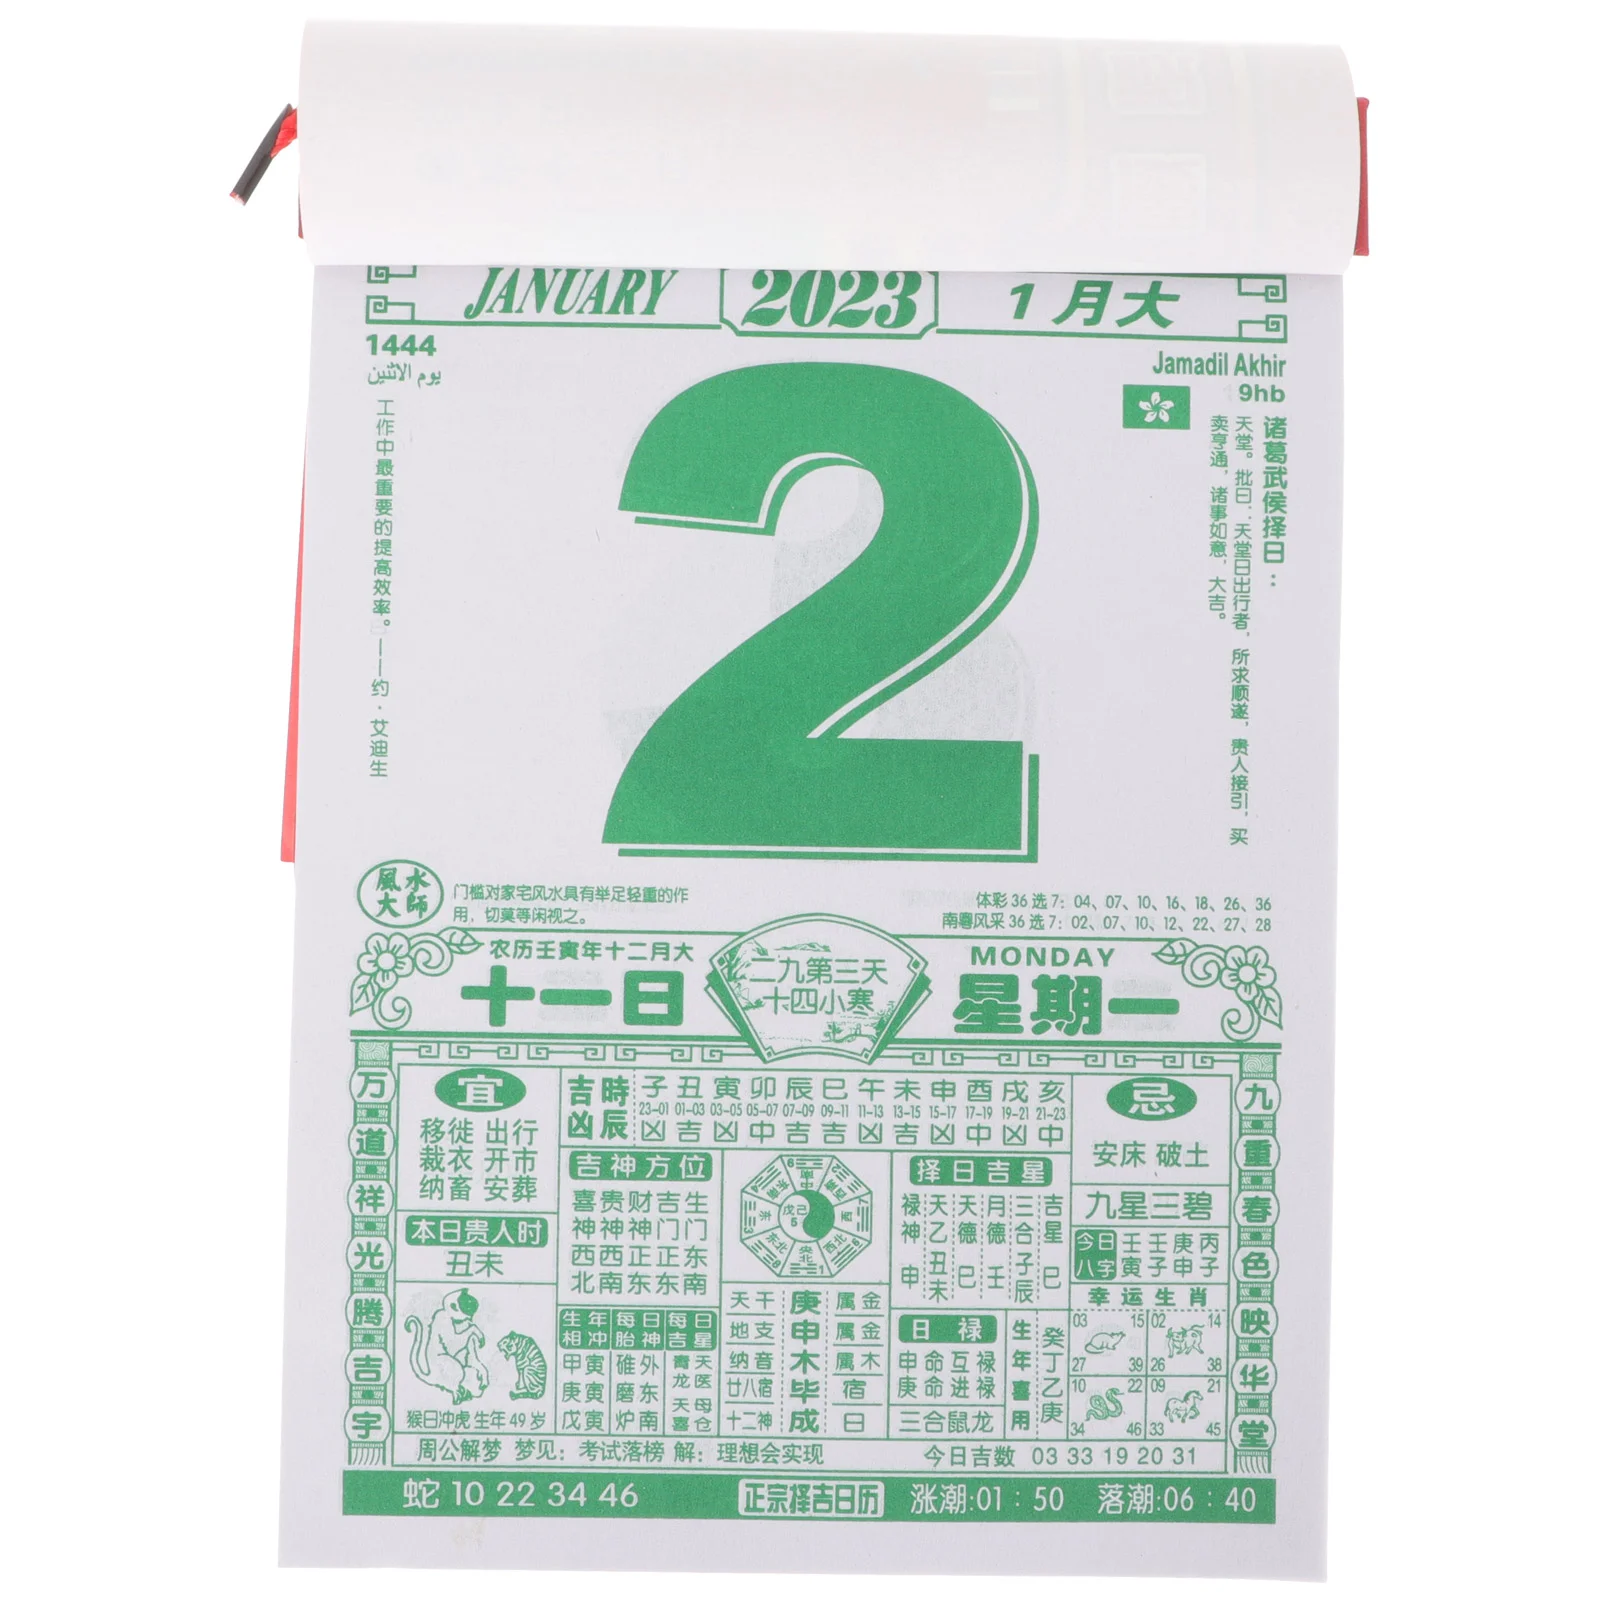 

Calendar Chinese Yearrabbit Lunar 2023 Calendars Daily Desk Smalltraditional The Wall Party One Date Today Page Per Day